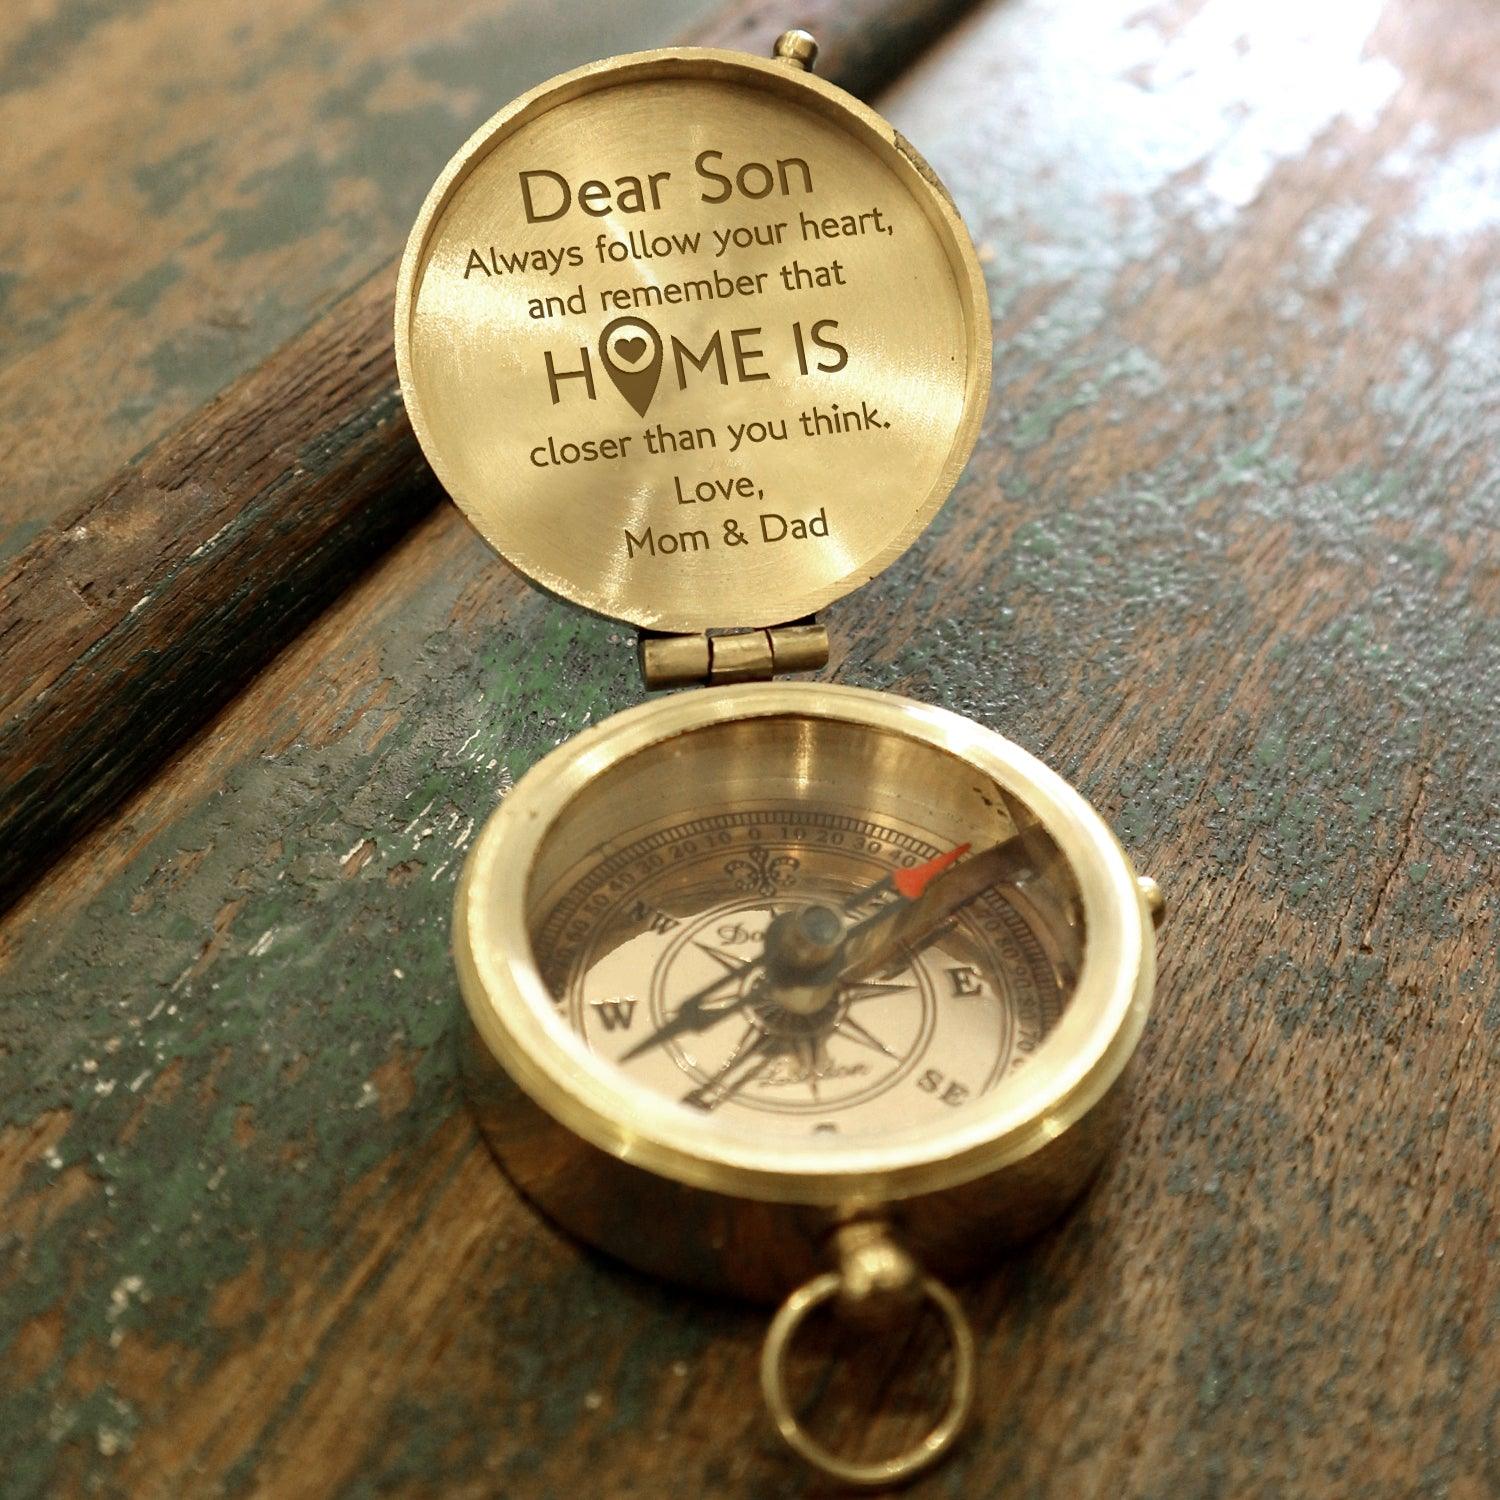 Engraved Compass - Travel - To My Son - Home Is Closer Than You Think - Augpb16016 - Gifts Holder